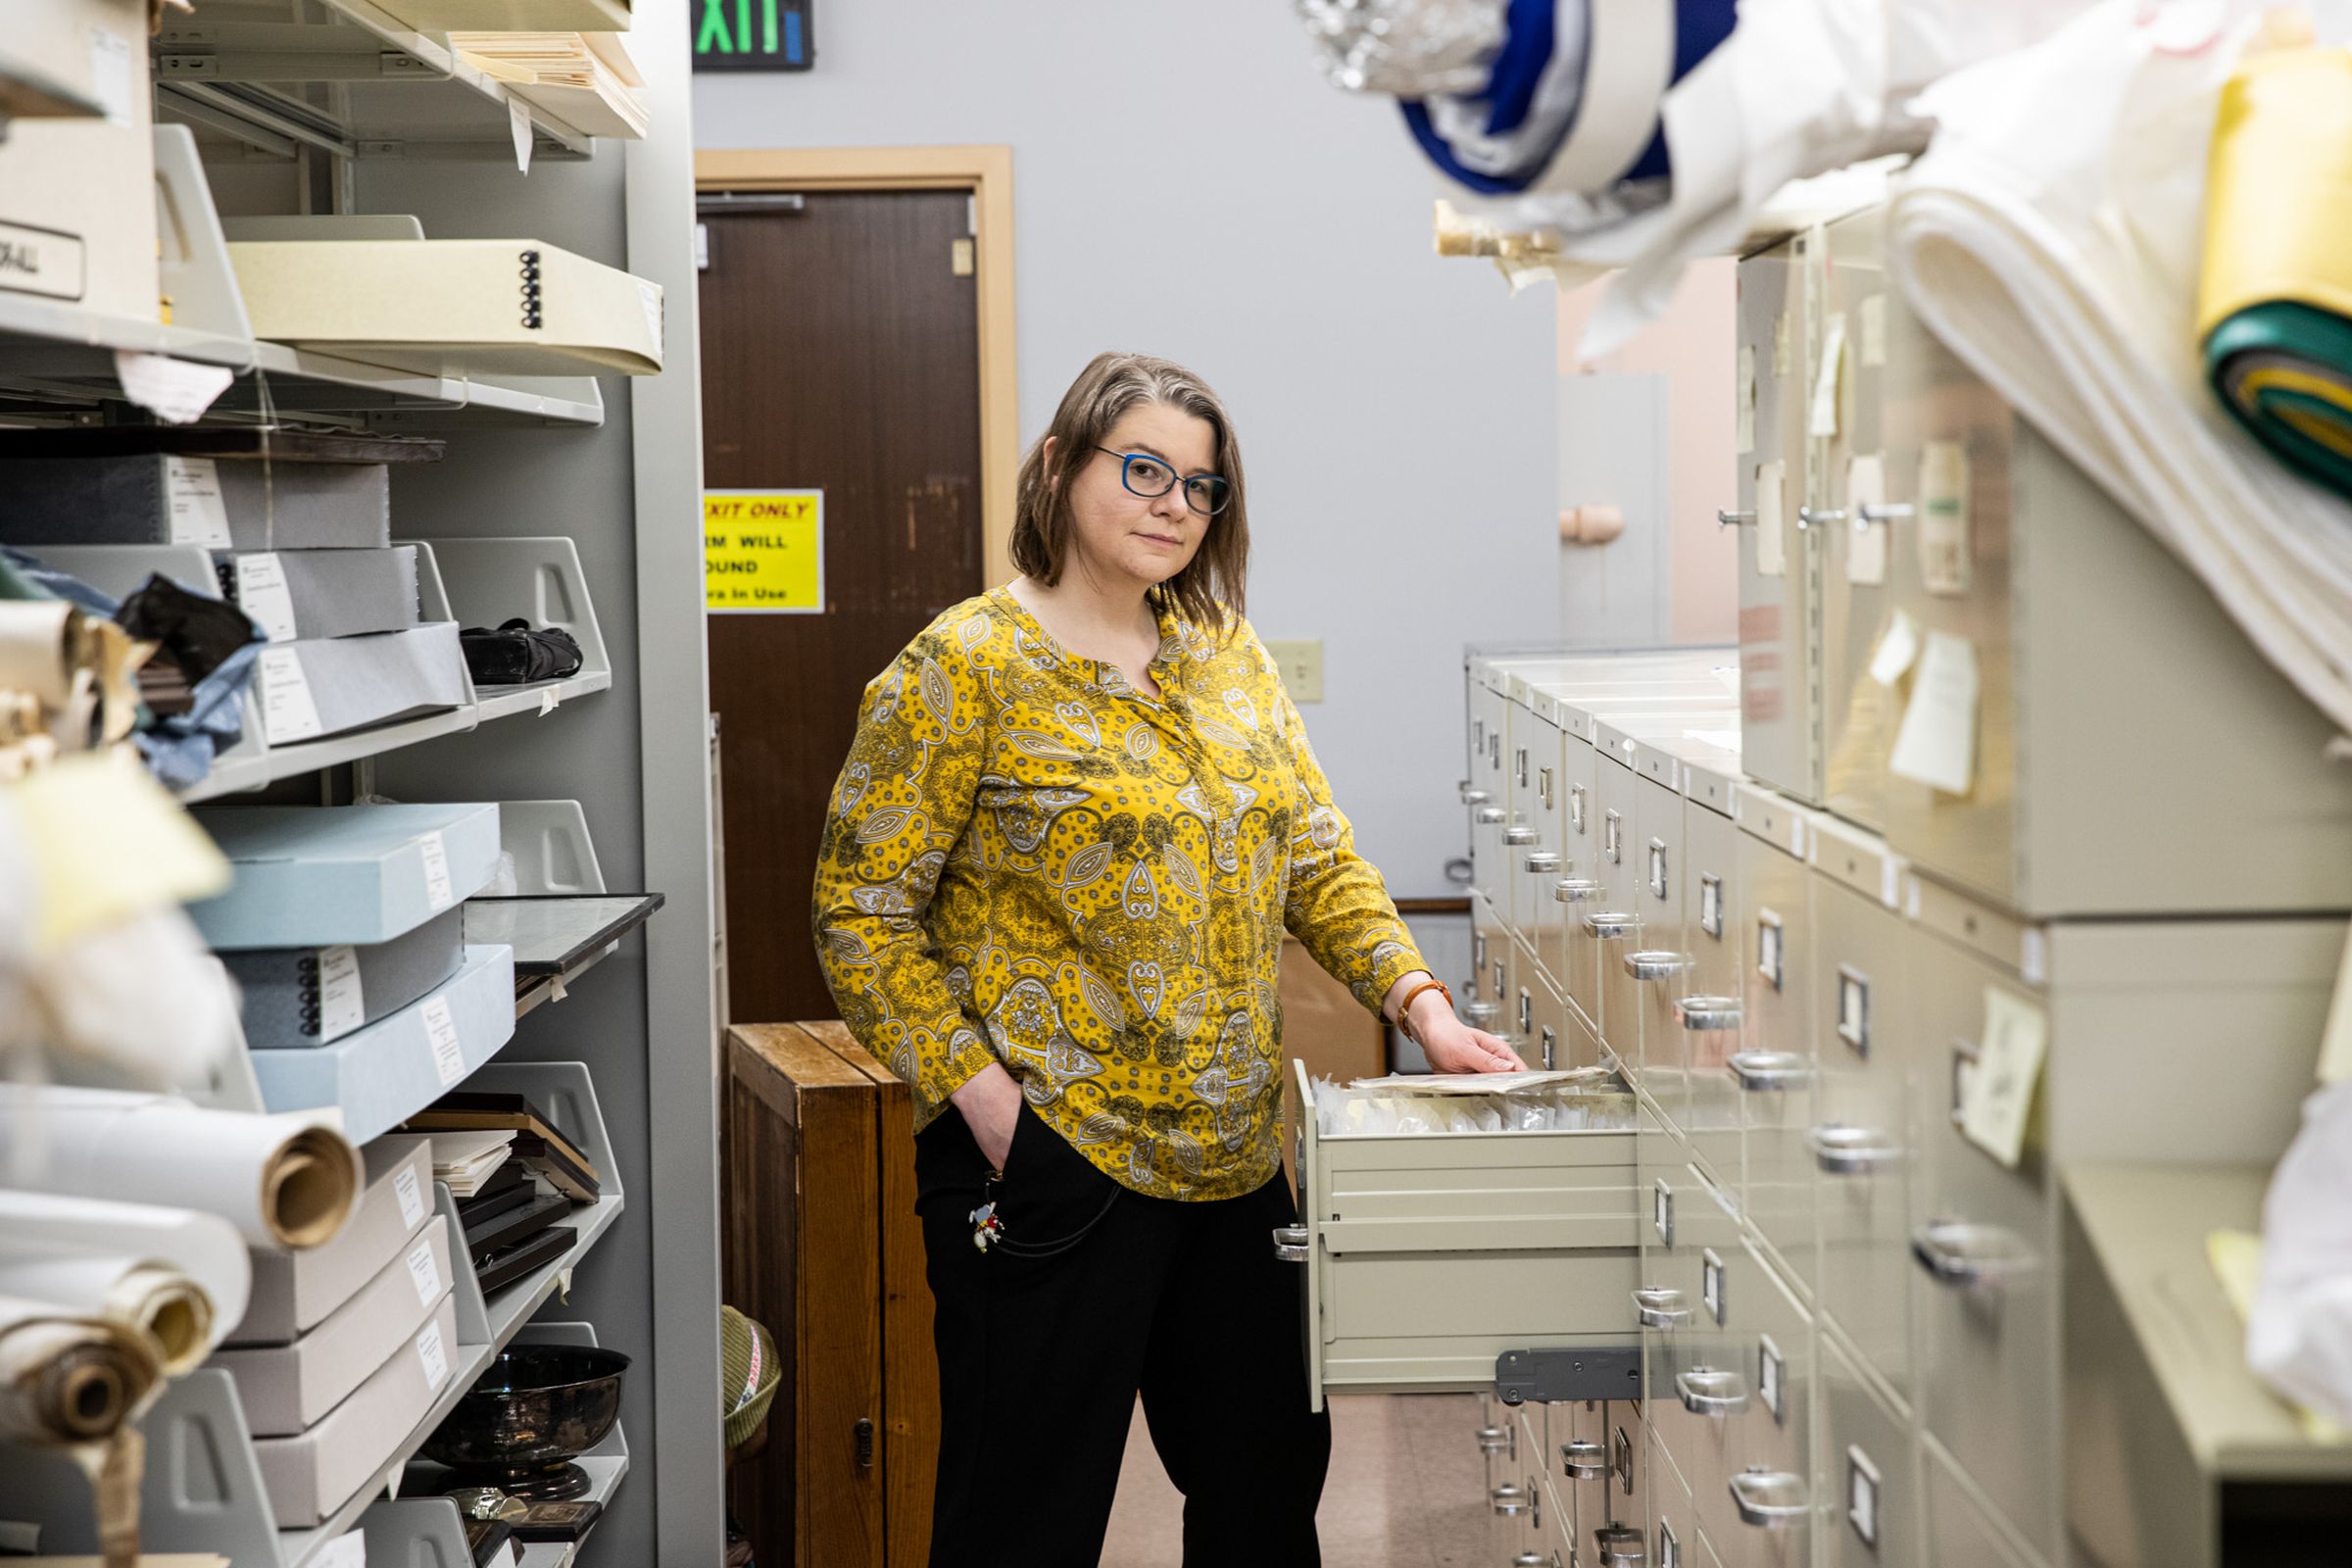 Director of Distinctive Collections, Karen Morse gives a tour of the Consumer Pattern Archive housed in Carothers Library at the University of Rhode Island in Kingston, Rhode Island on April 21st 2022.